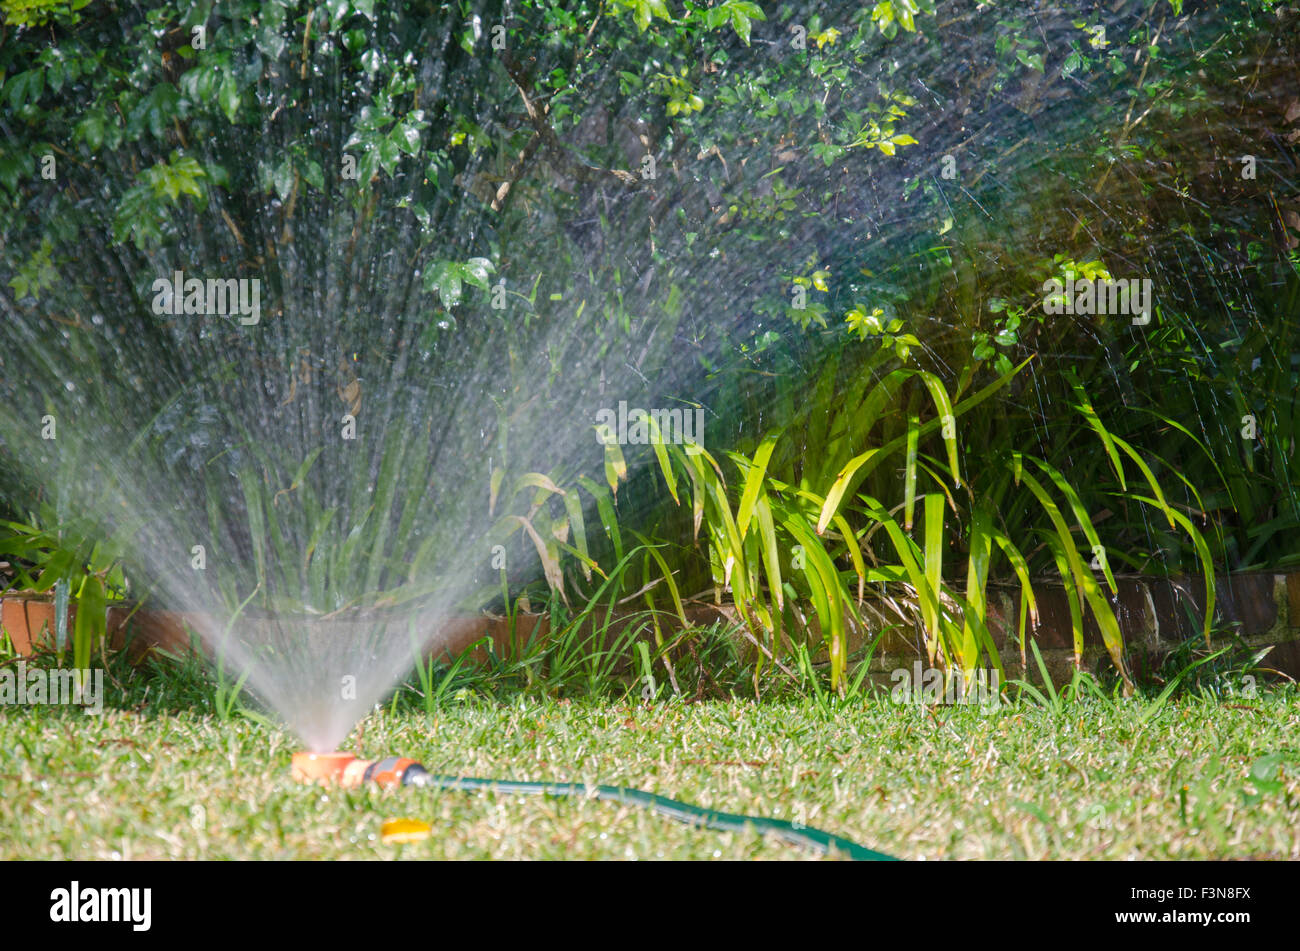 A garden sprinkler on St. Augustine (Palmetto) grass. Sprinklers are very common in Australian backyards as a way to water gardens and lawns. Stock Photo